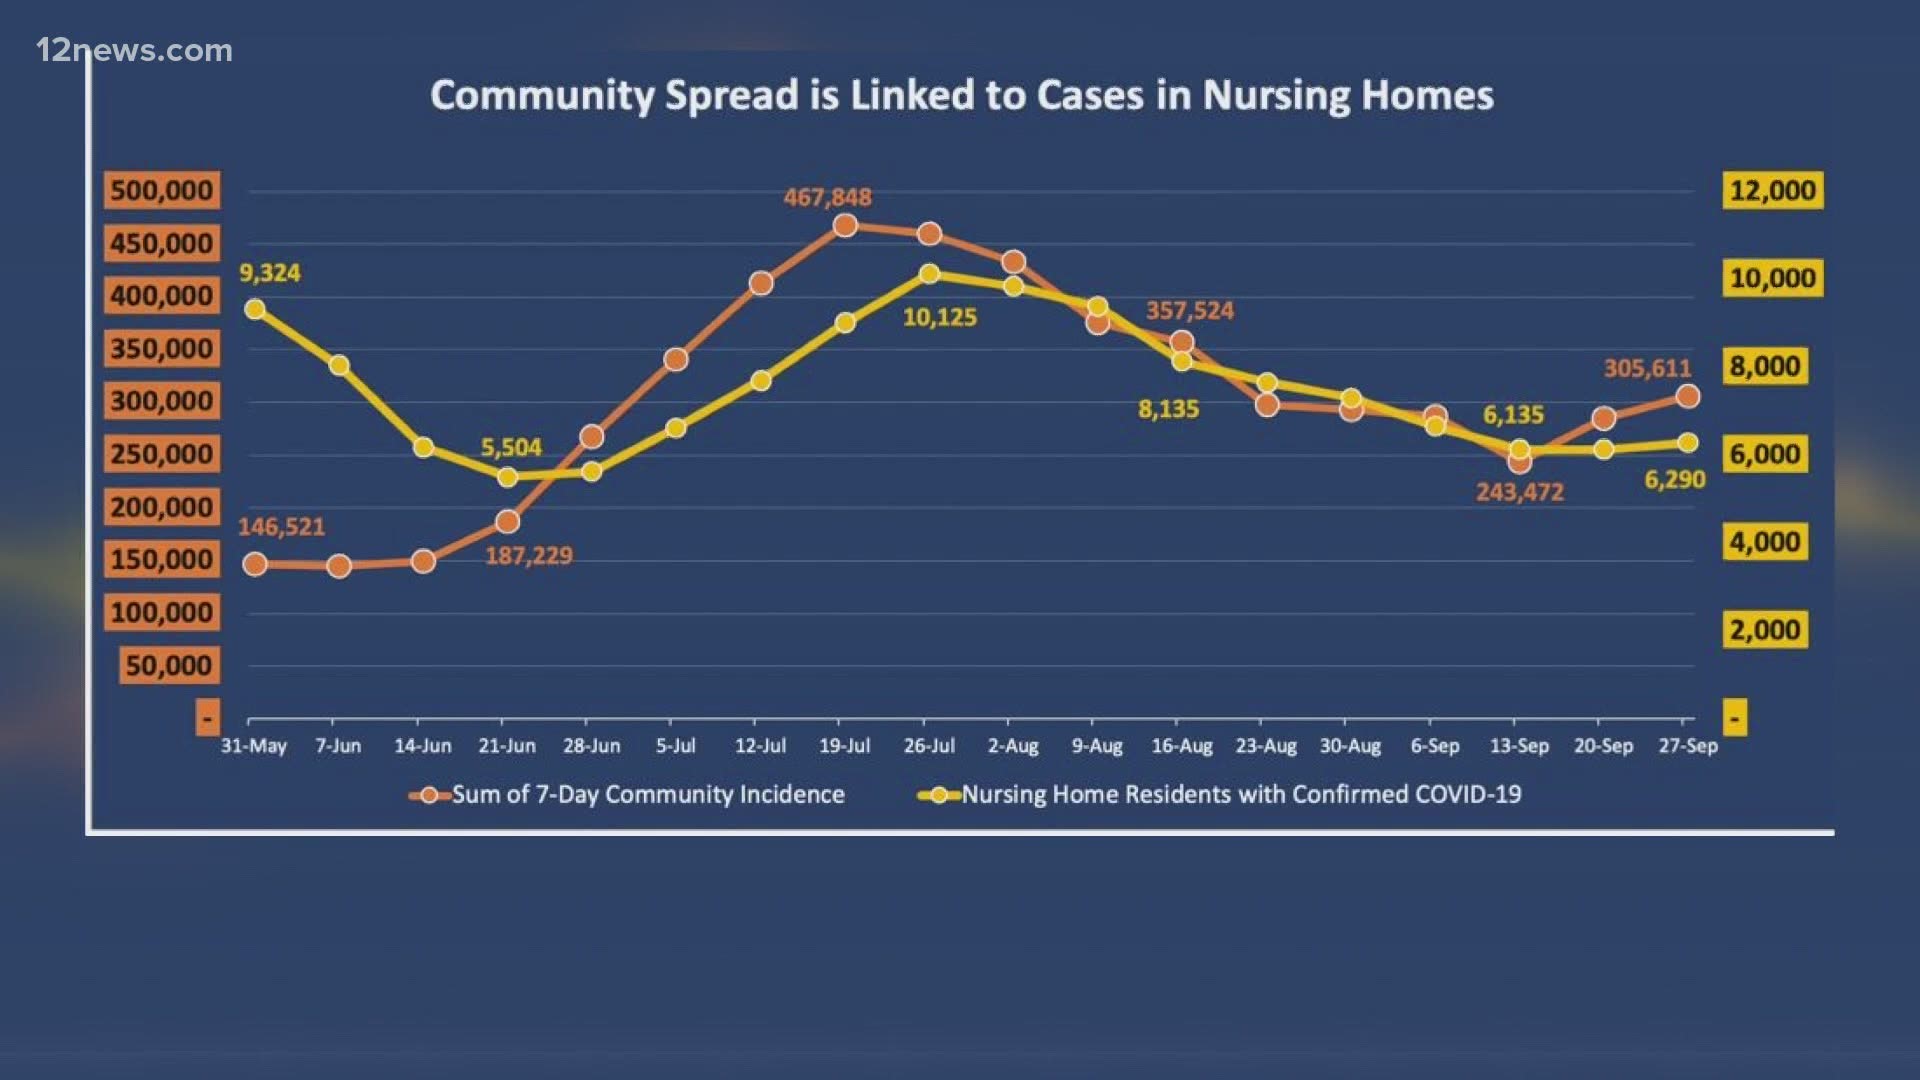 Nursing homes are raising a red flag, saying they may soon be overcome with COVID cases. Johns Hopkins University says the rise in cases is due to community spread.